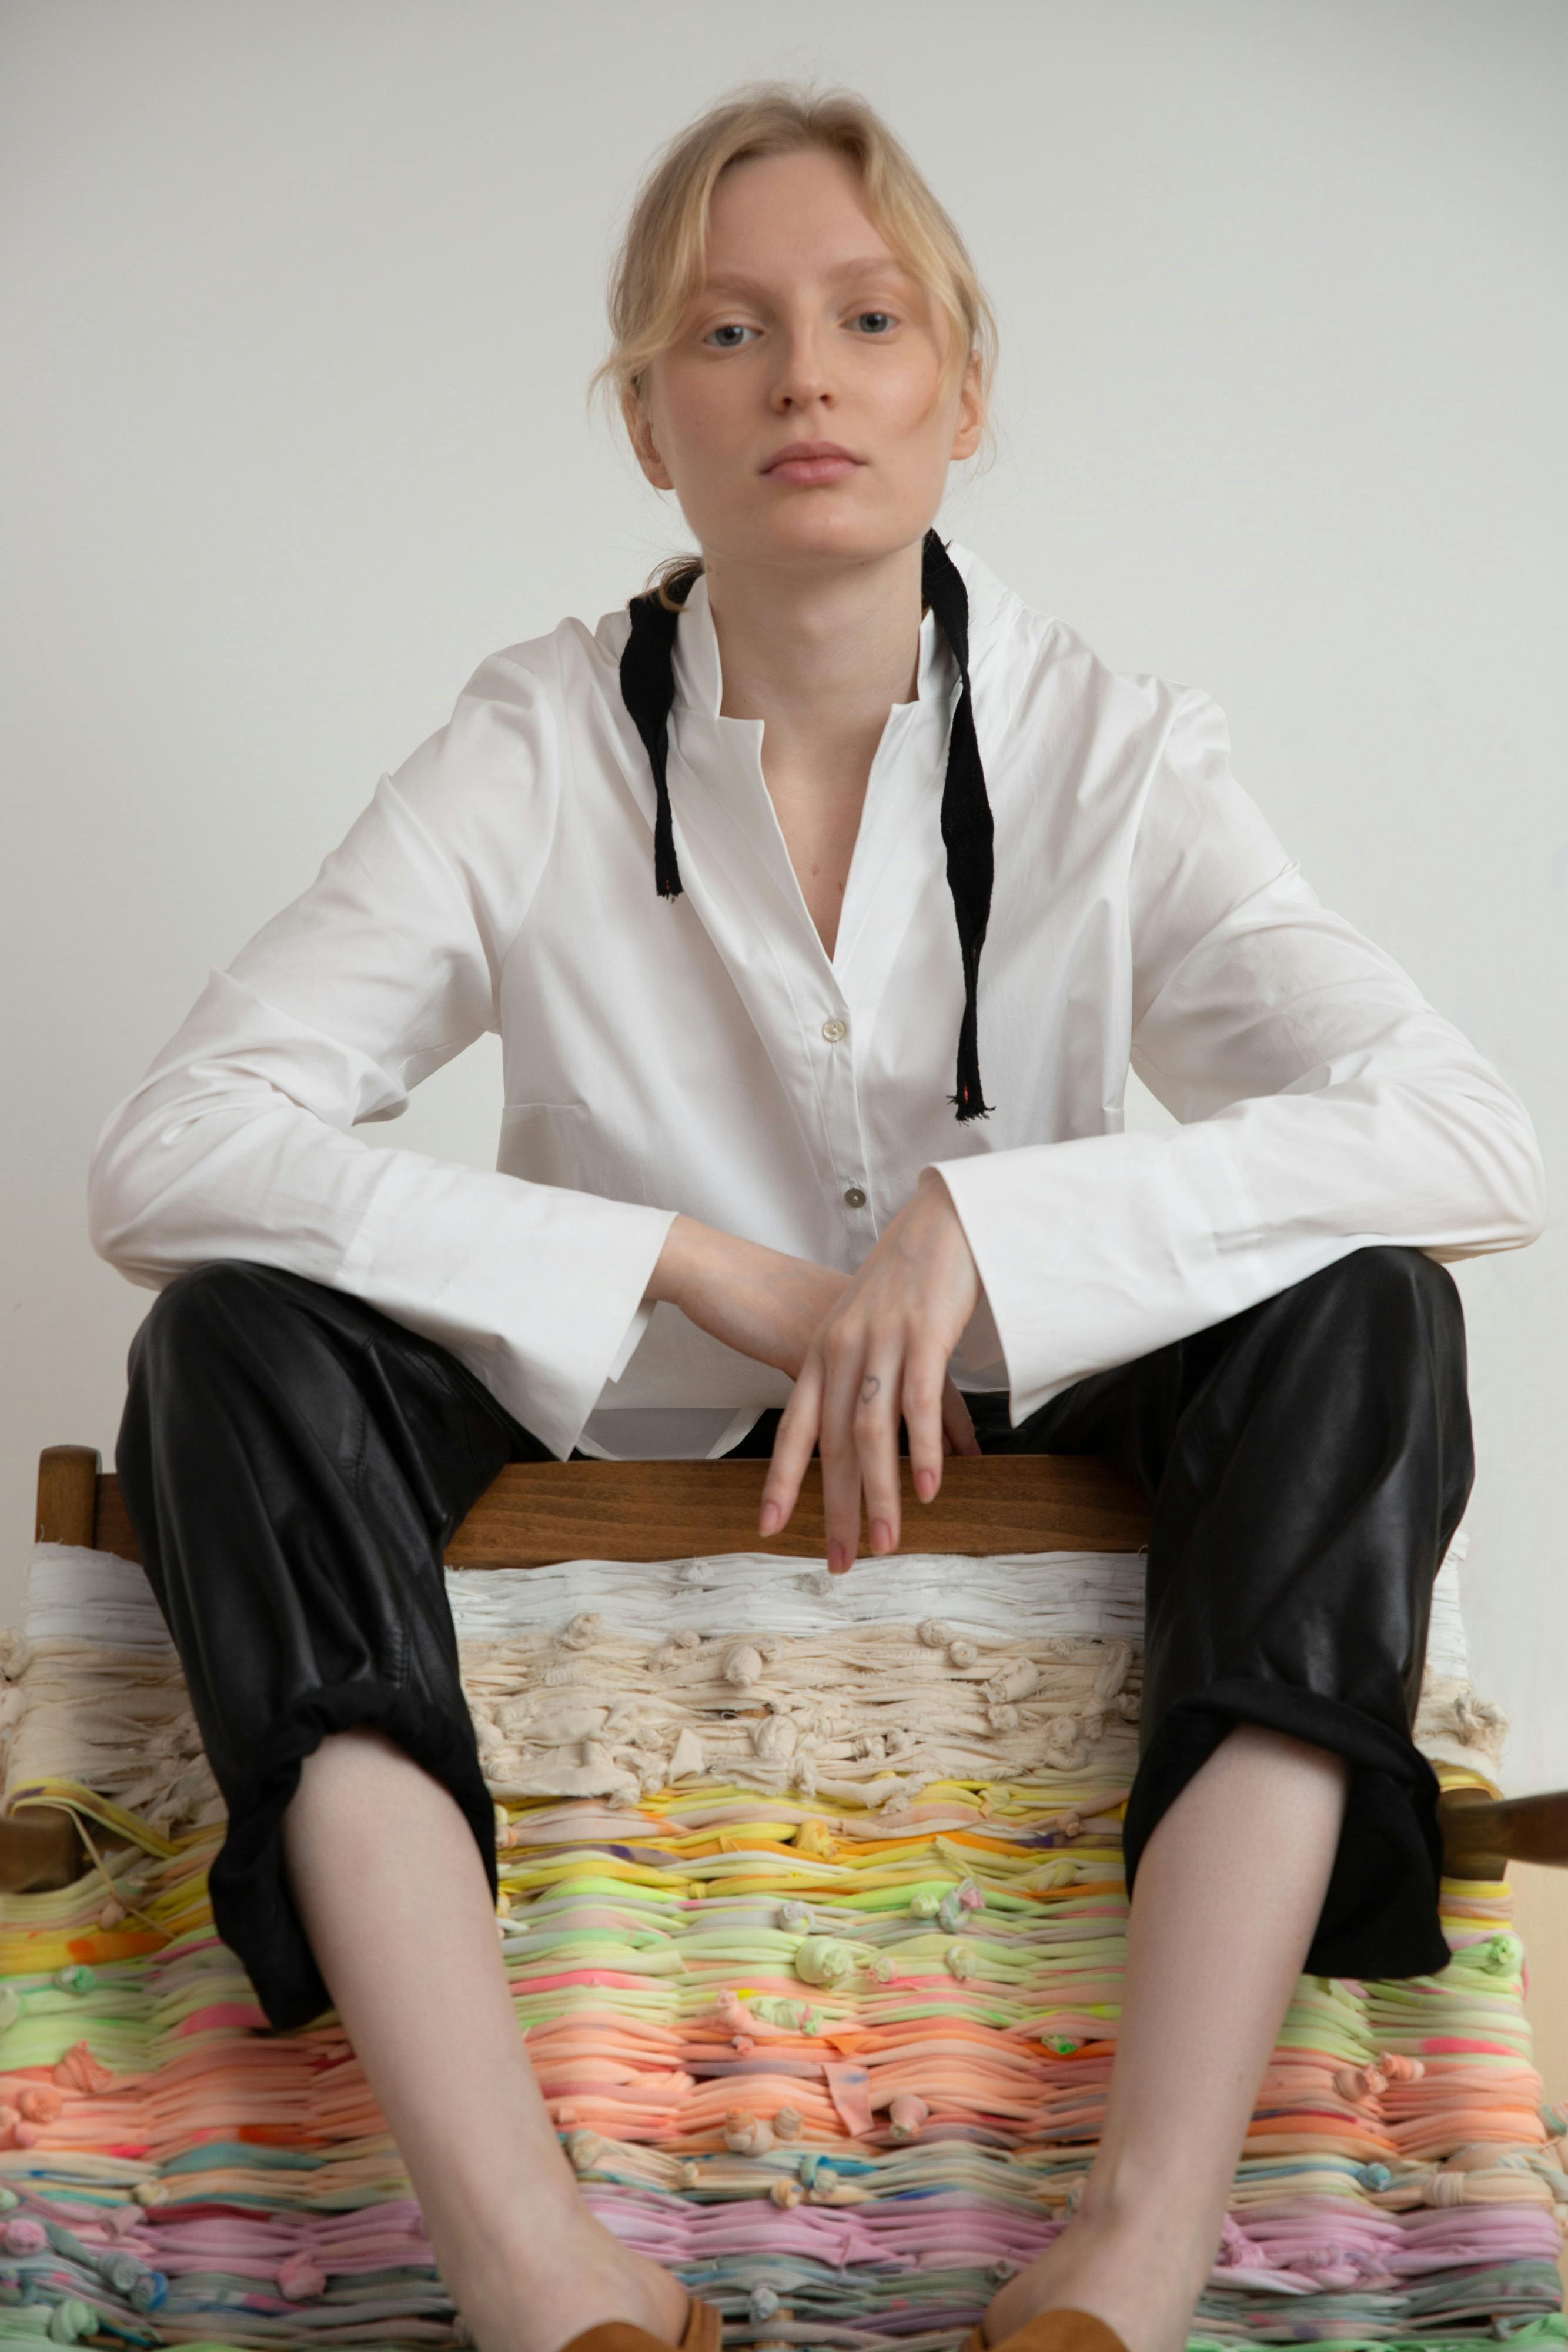 Woman wearing the Mirta collared shirt showing the characteristic attributes of a shirt by Mikke